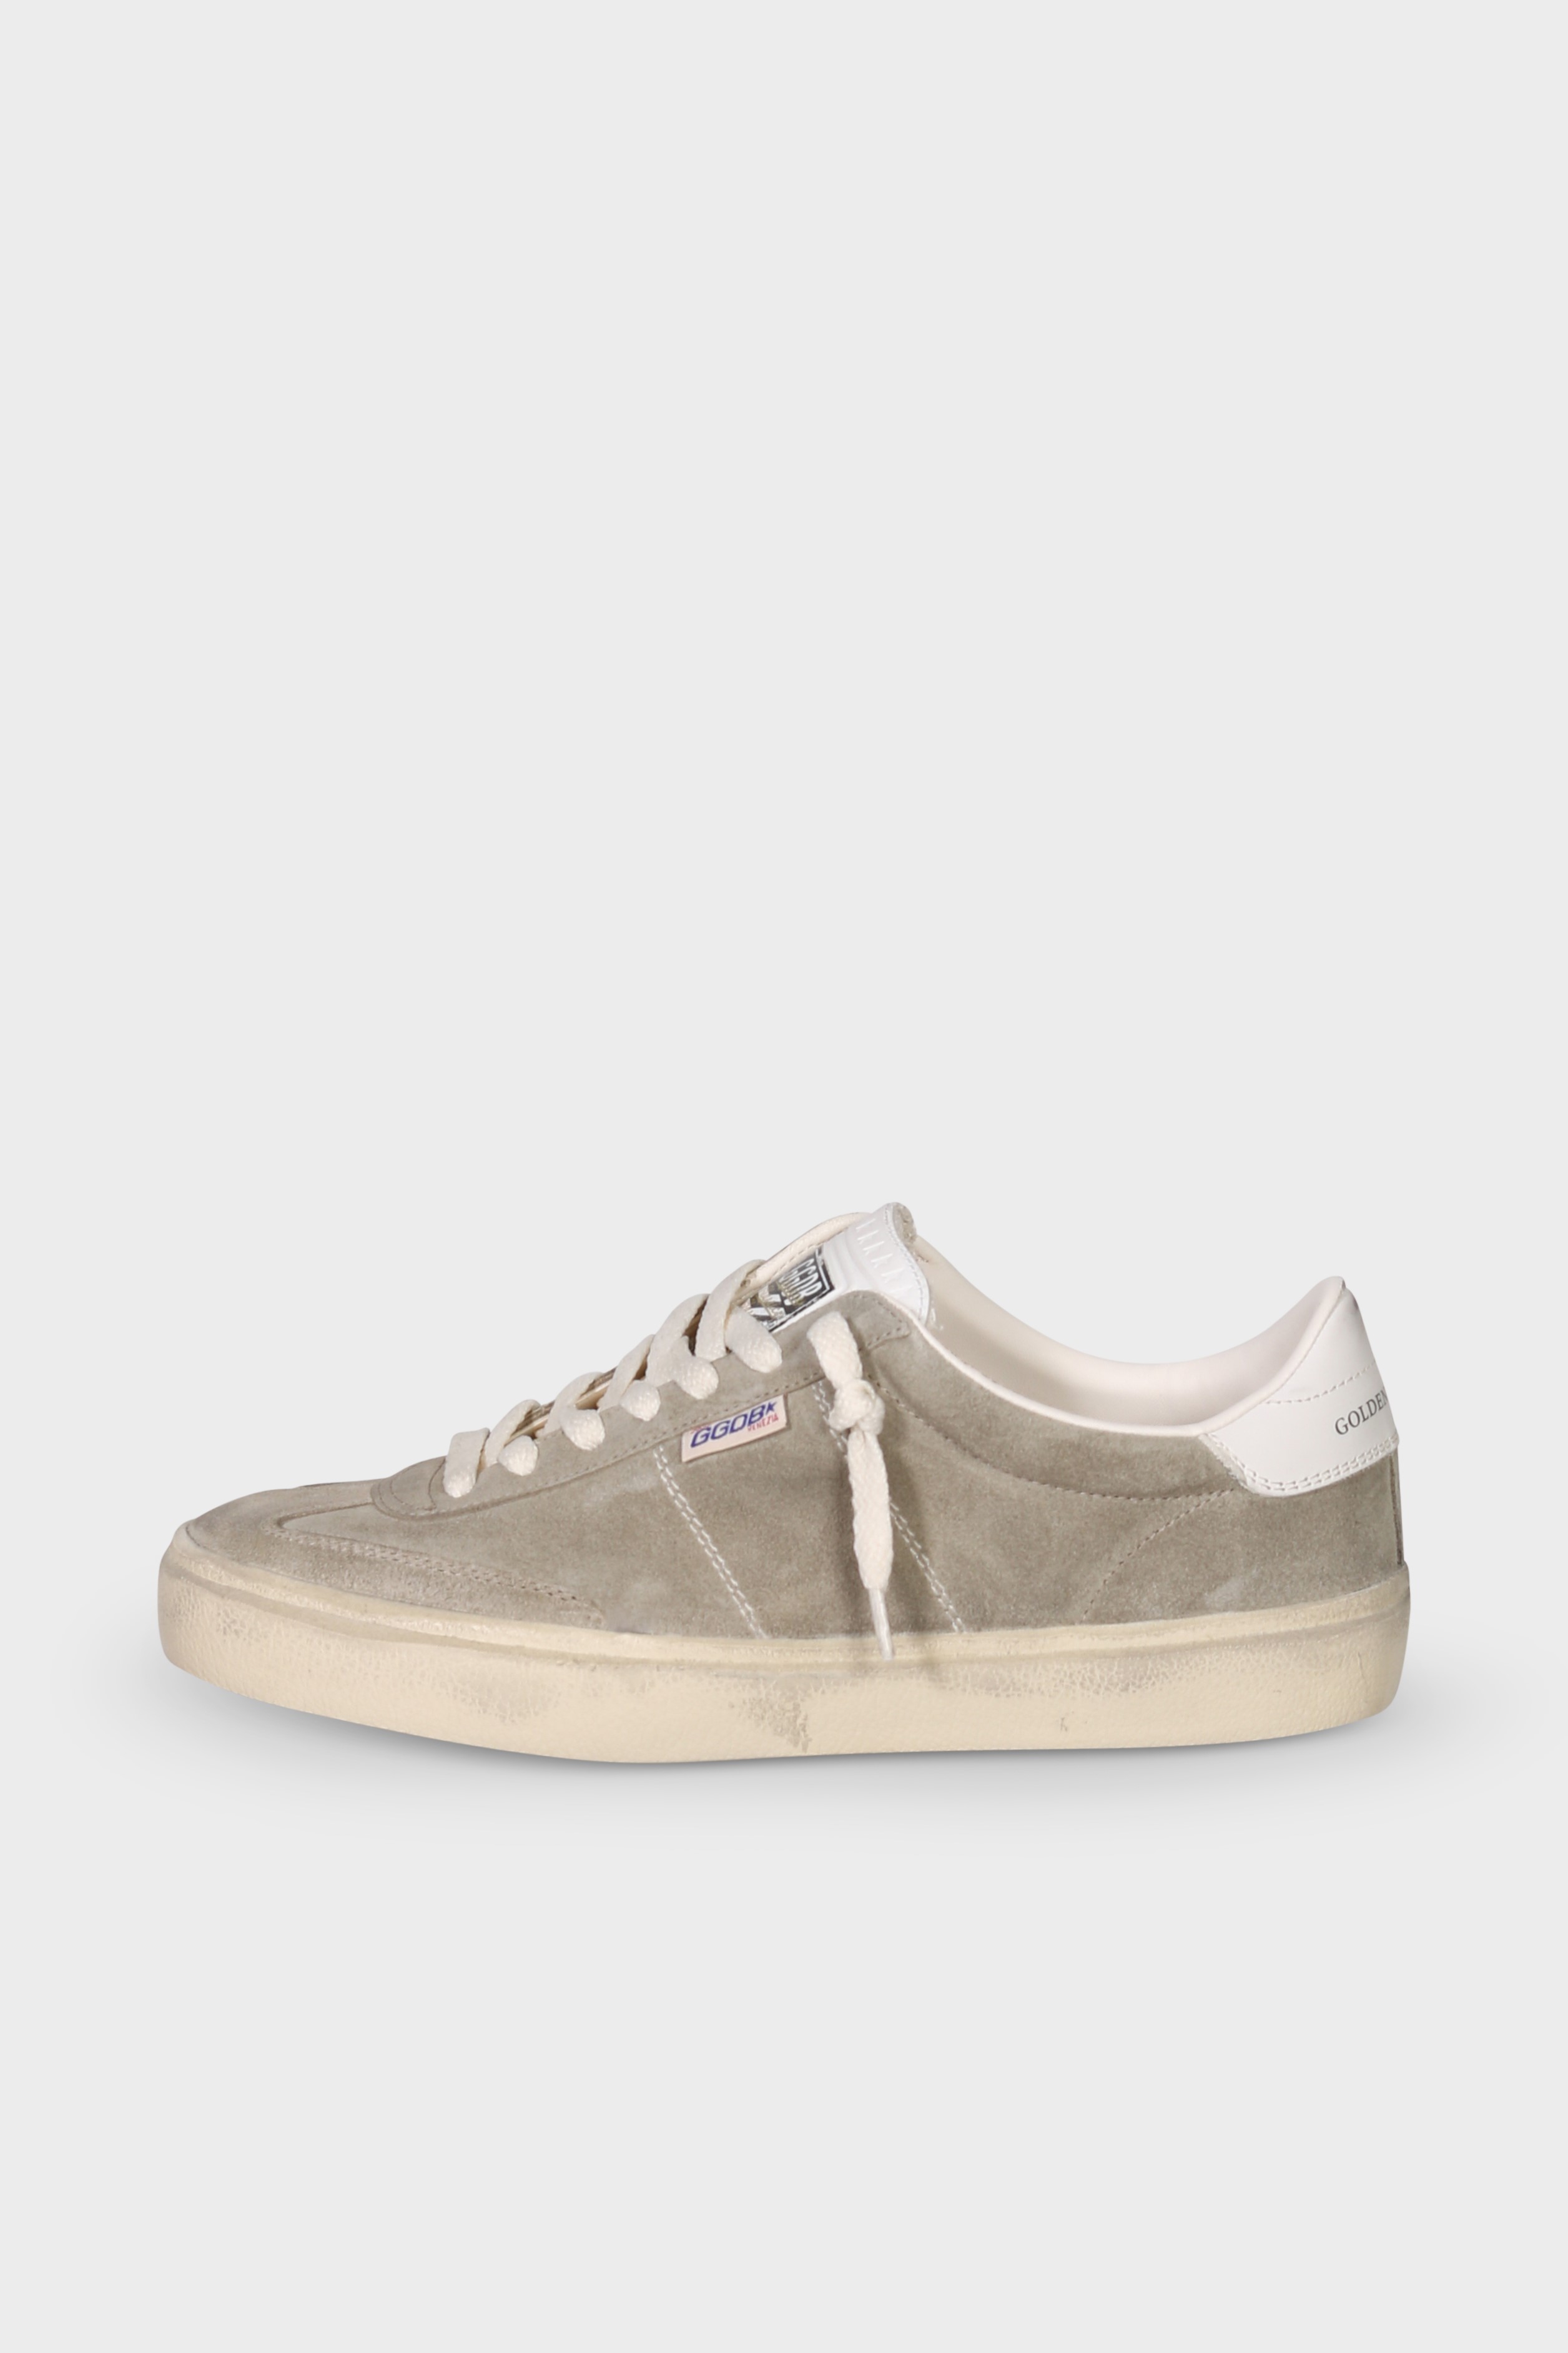 GOLDEN GOOSE Soul-Star Suede in Taupe/Milk